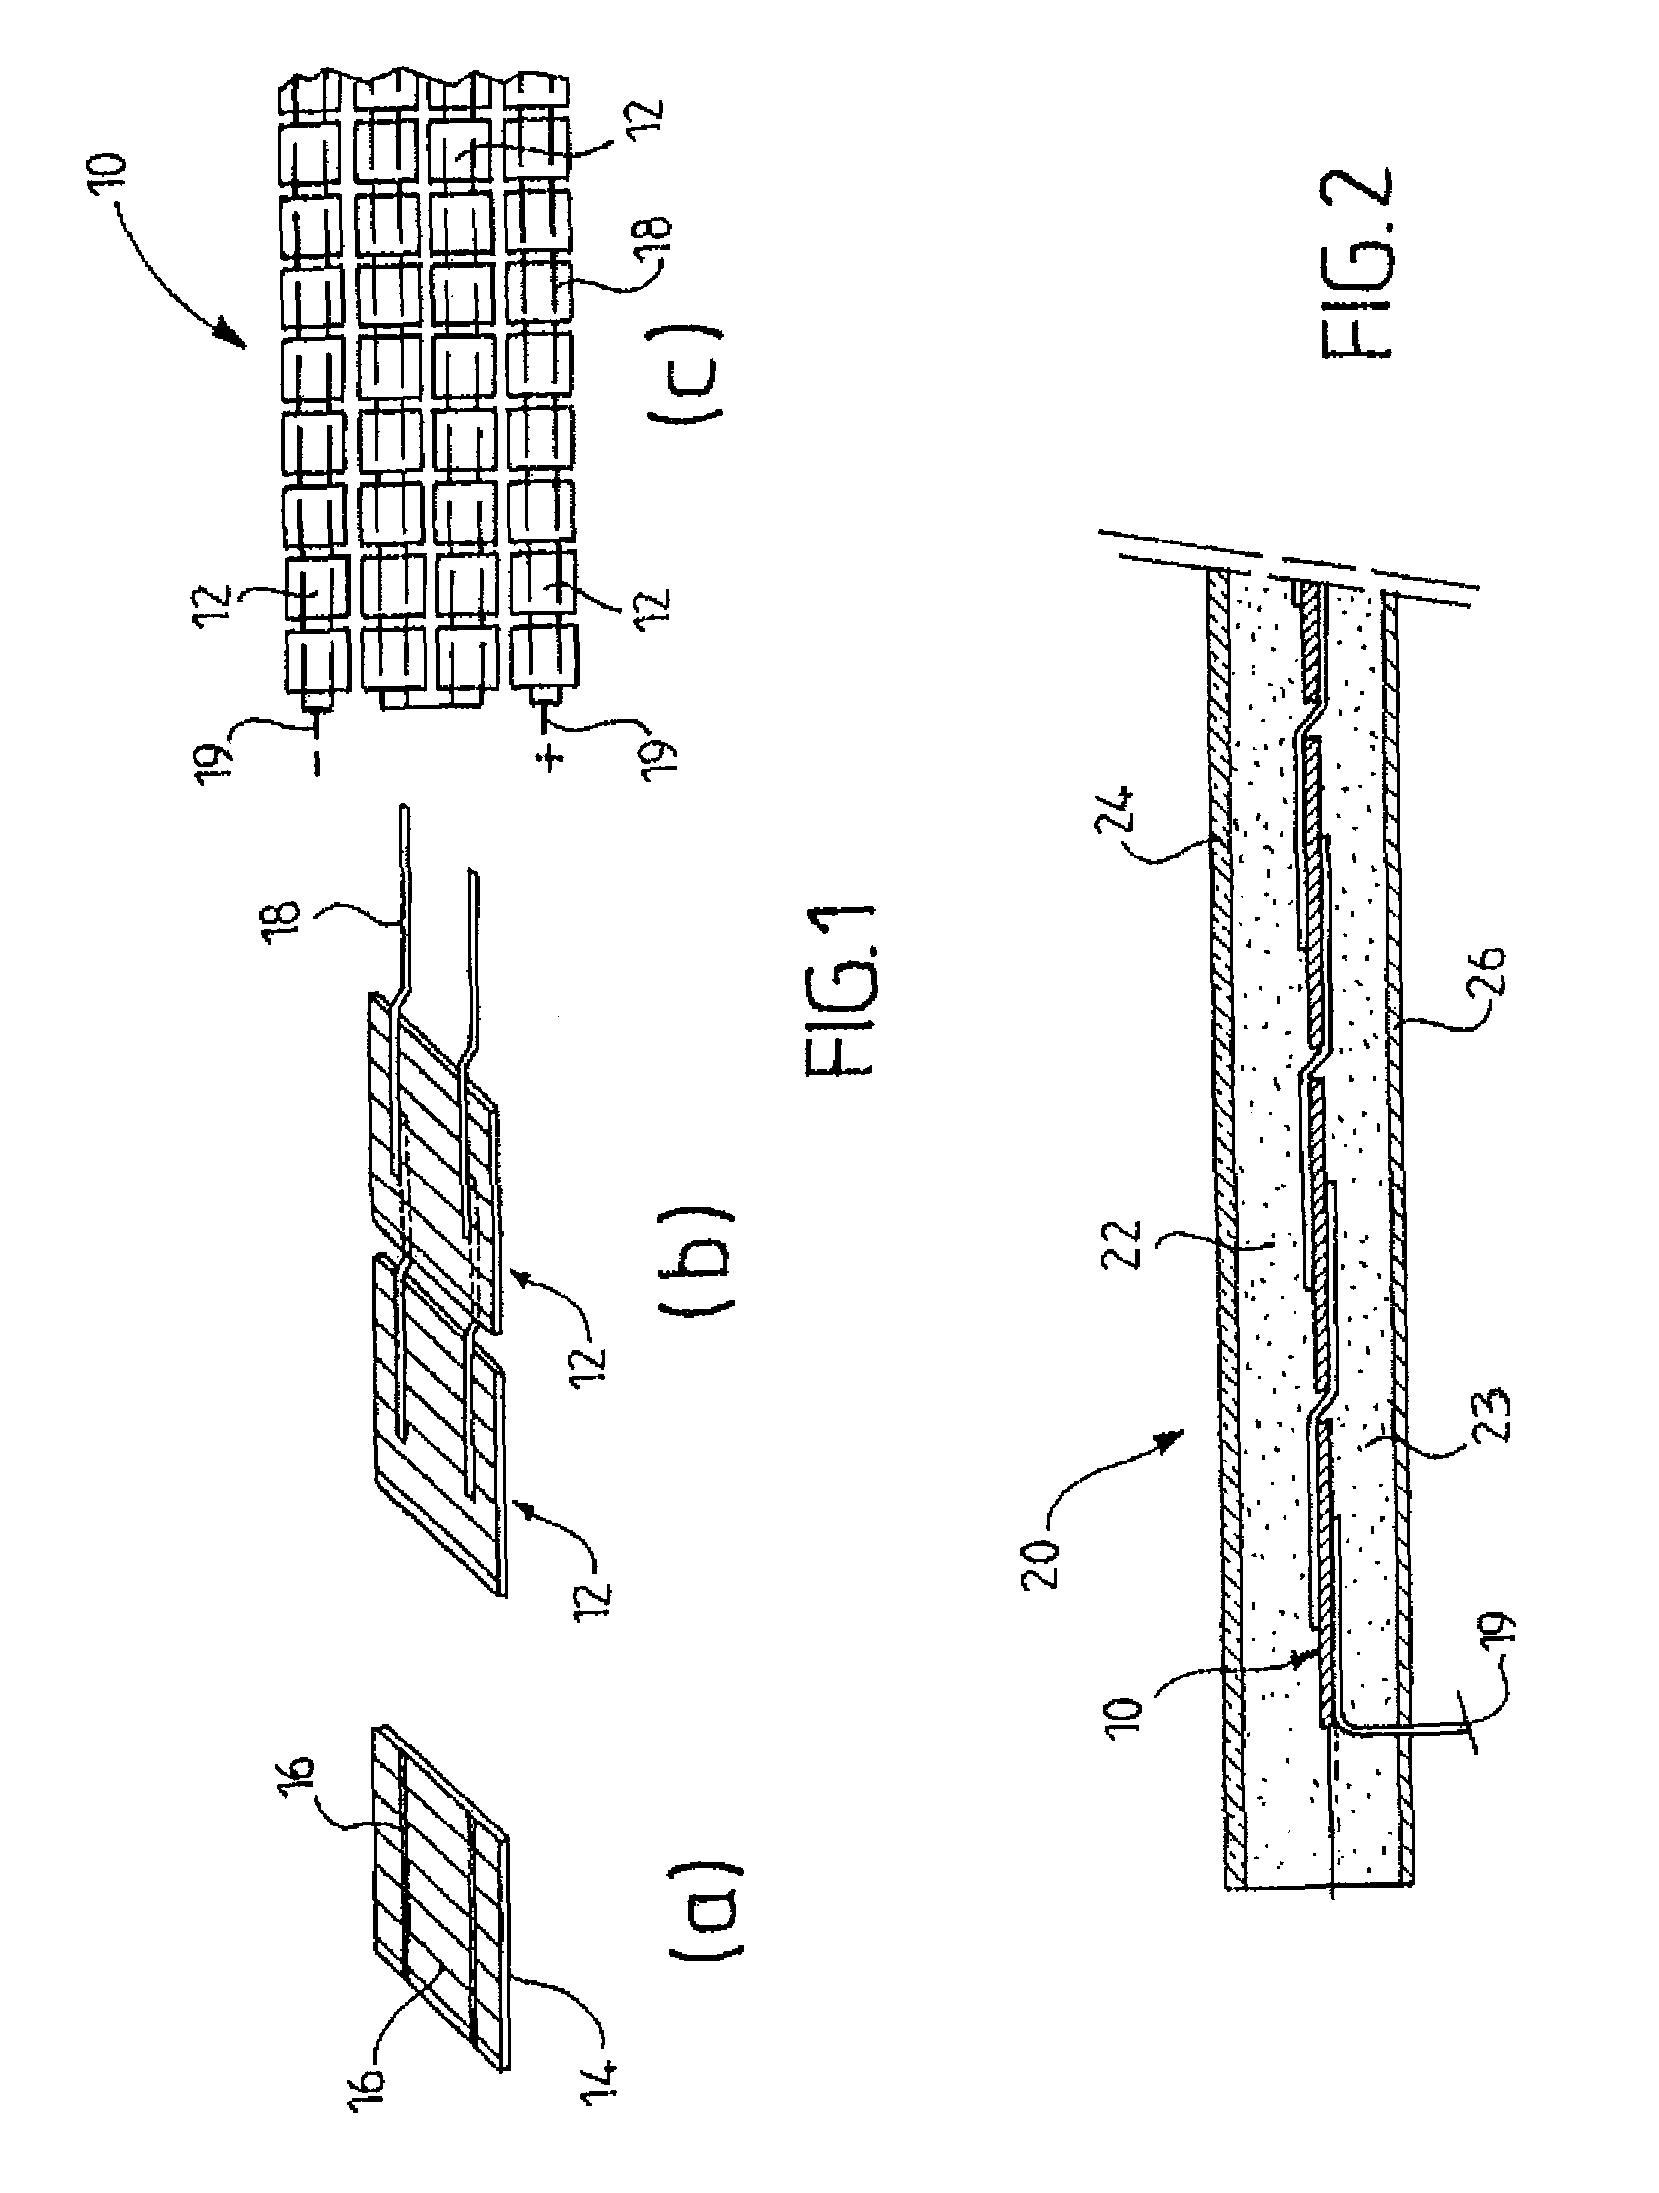 Use of a polyethylene-based film in a photovoltaic module